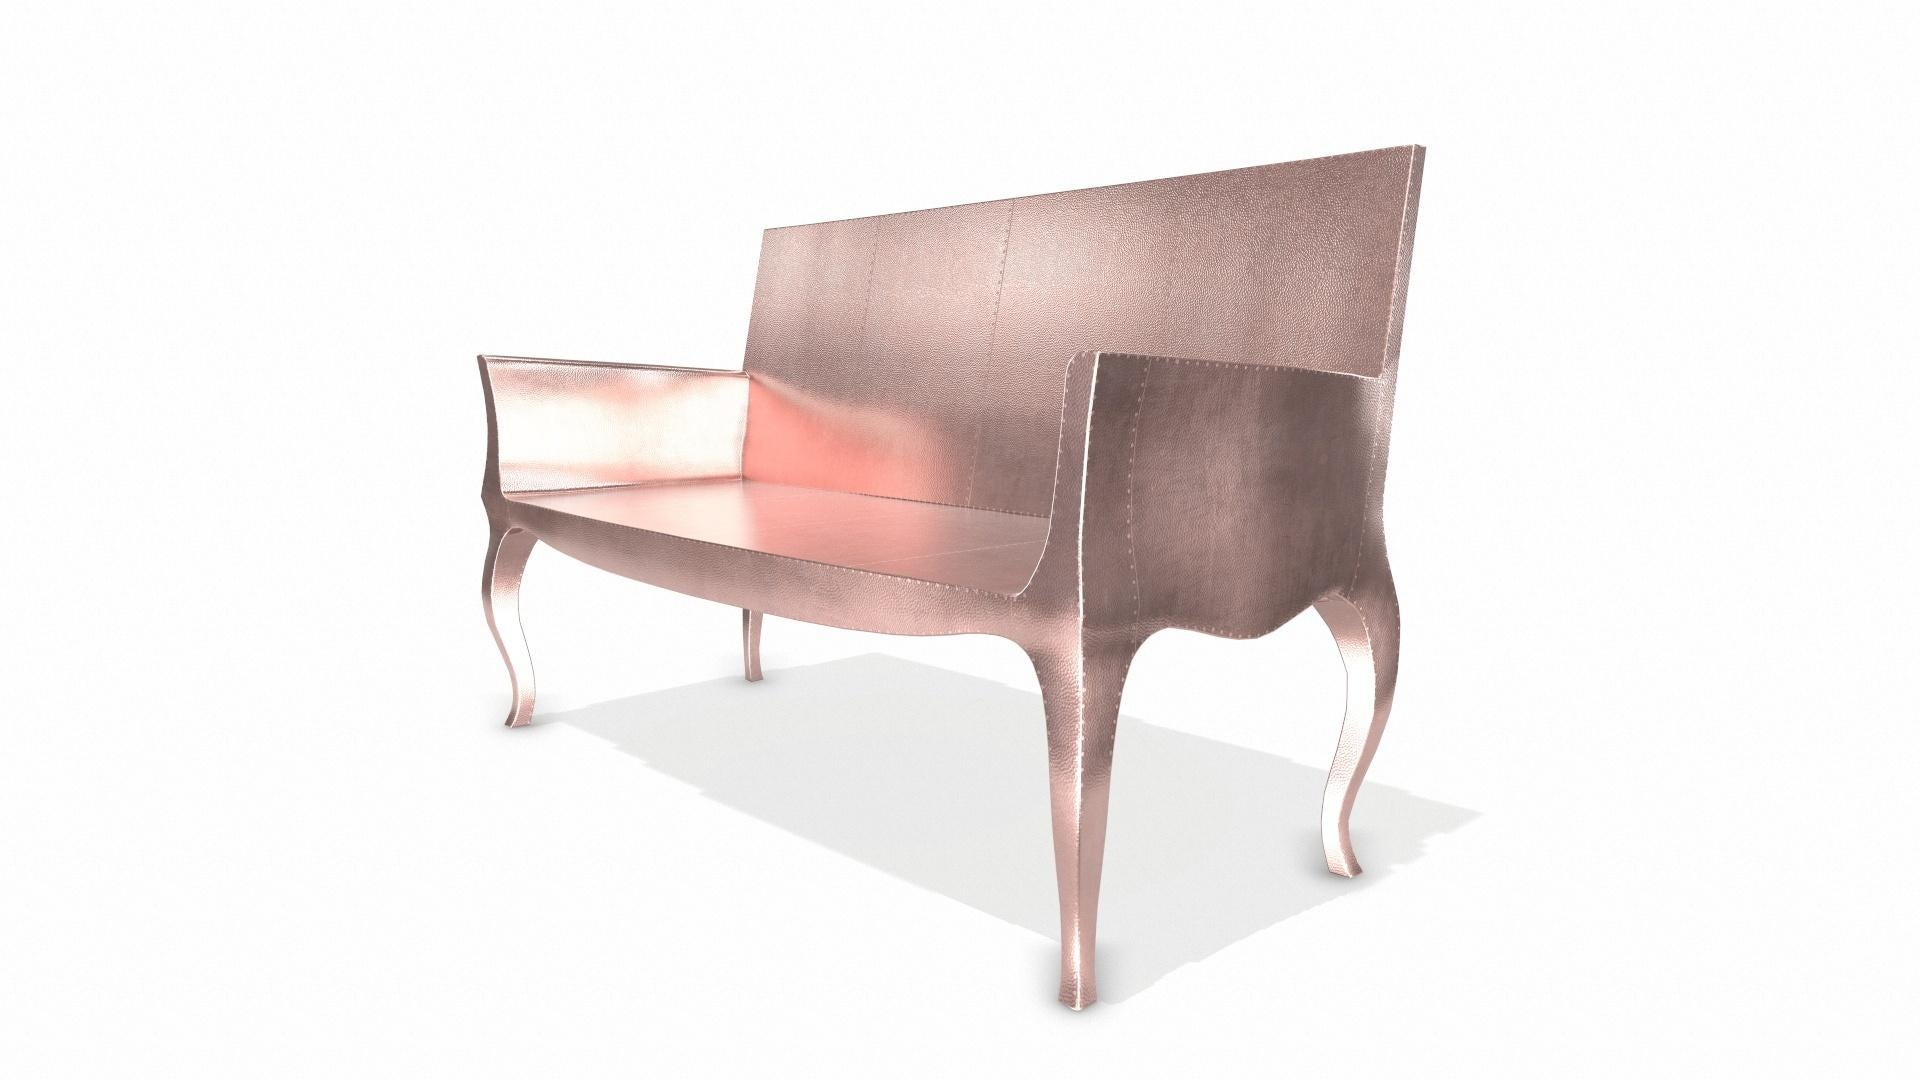 Hand-Crafted Louise Settee Art Deco Canapes in Mid. Hammered Copper by Paul Mathieu For Sale